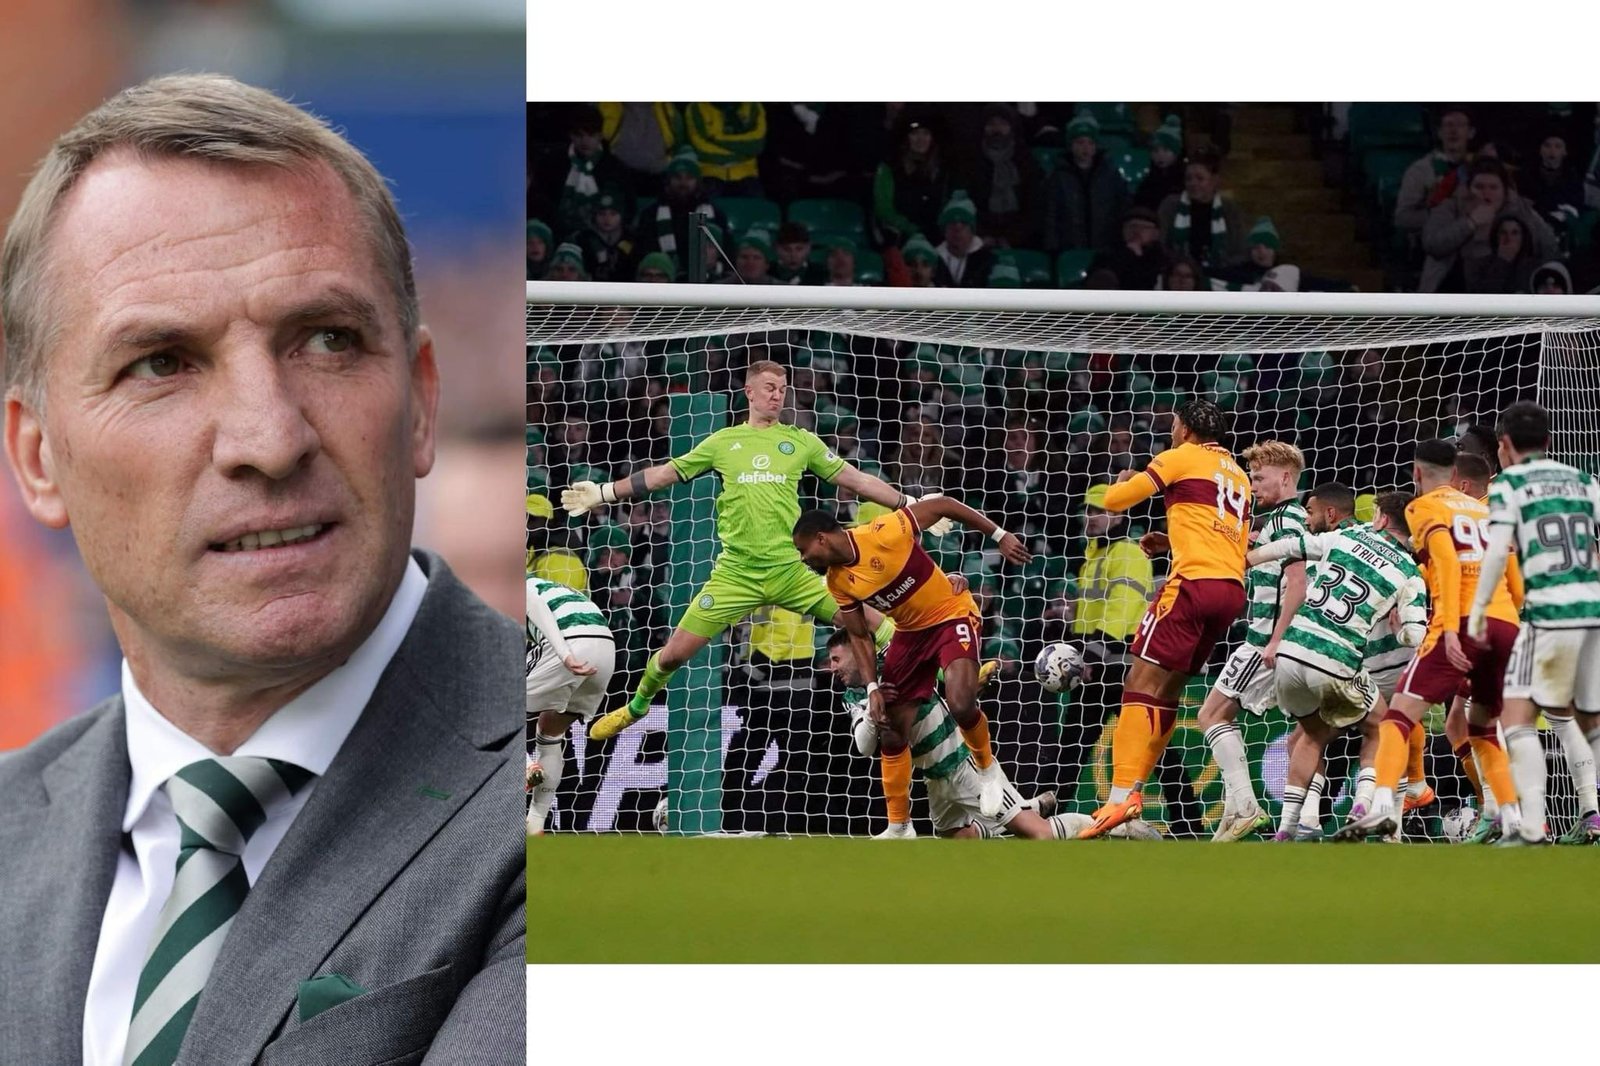 “We had enough opportunities to win the game" - Celtic Fc head coach Brendan Rodgers sadly reacts to 11 points miss as celtic vs Motherwell ended in a draw